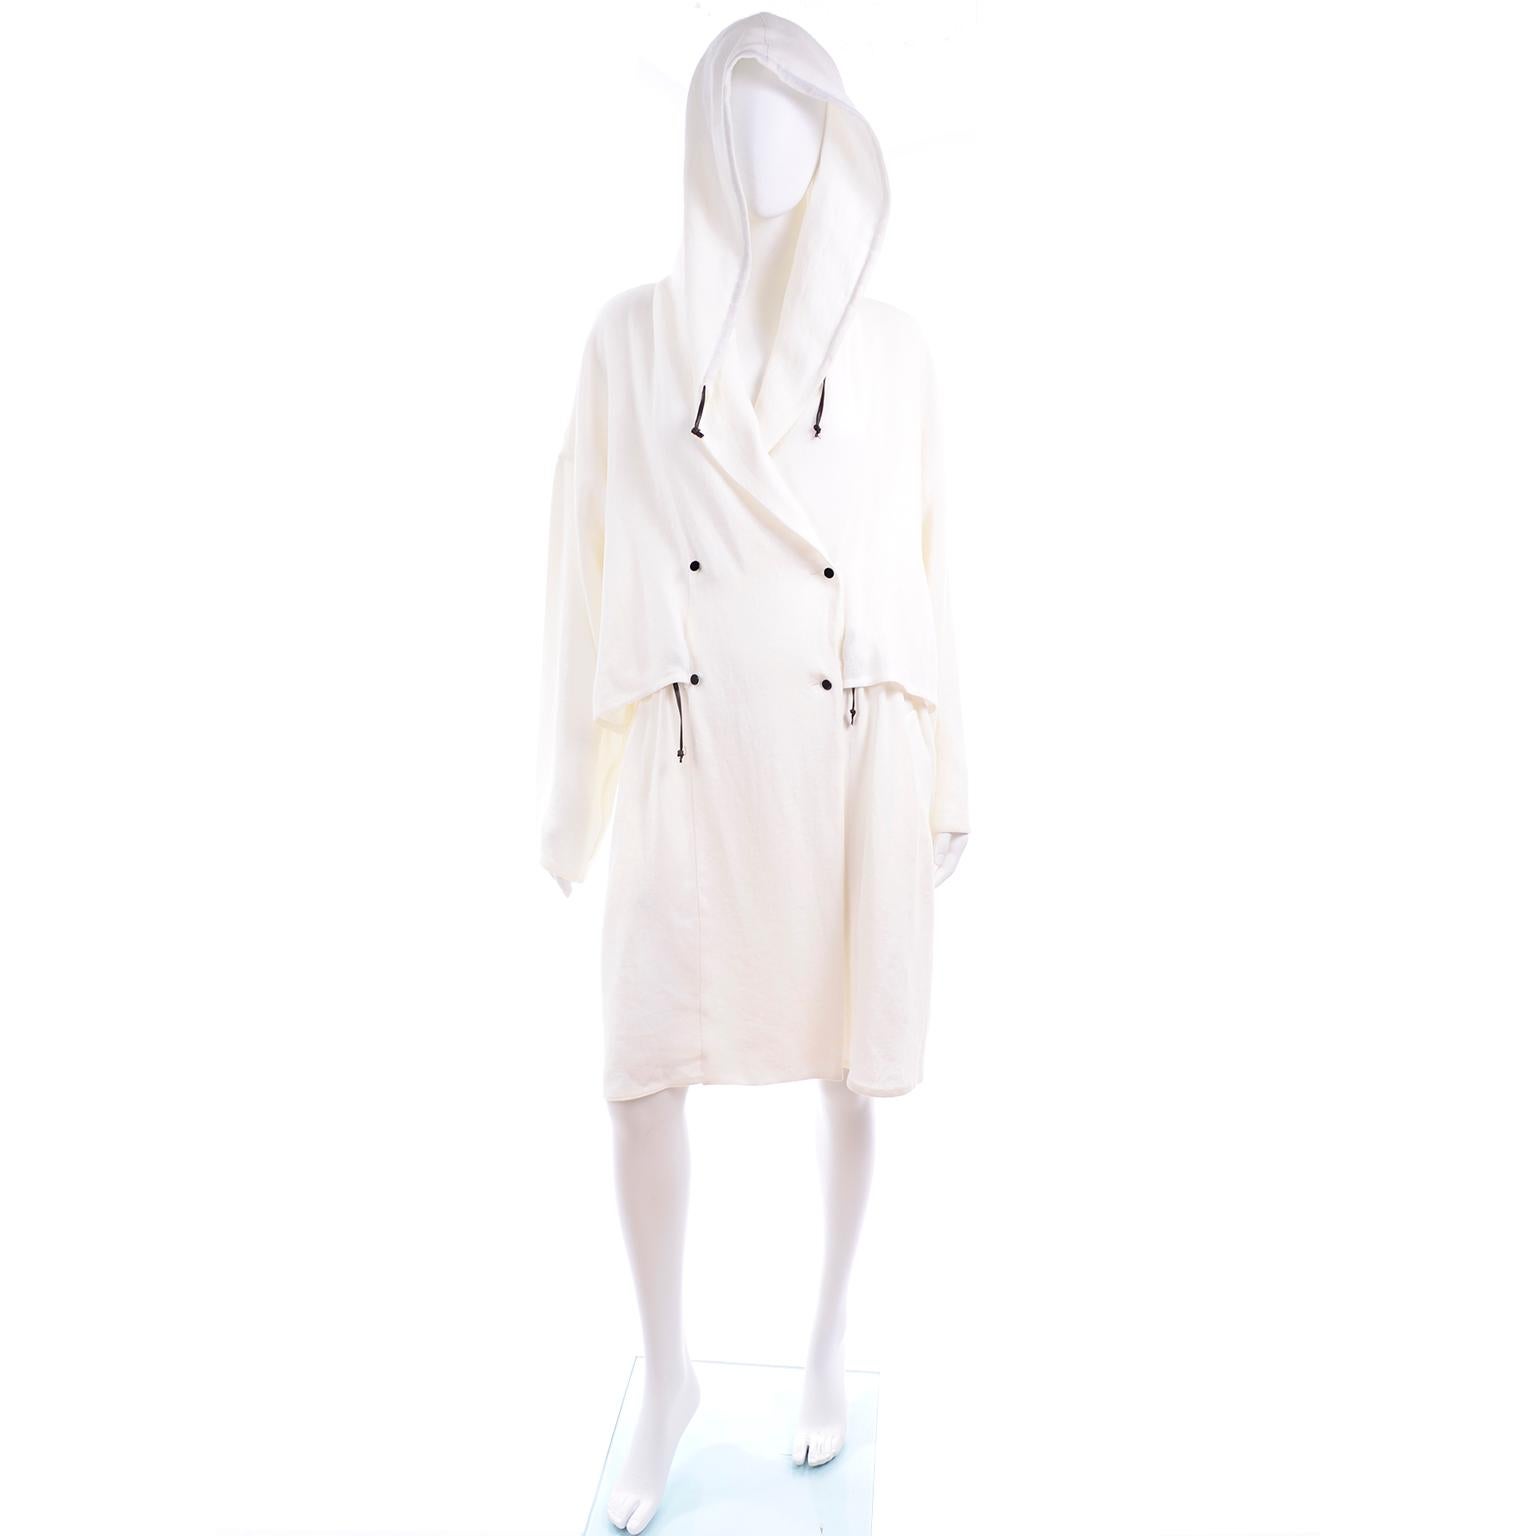 This is a gorgeous 100% linen drawstring hooded jacket from Dusan.  The coat is white with black drawstrings at the hood and waist. It crosses over to close with double breasted small black buttons. This luxe linen coat is deadstock with its